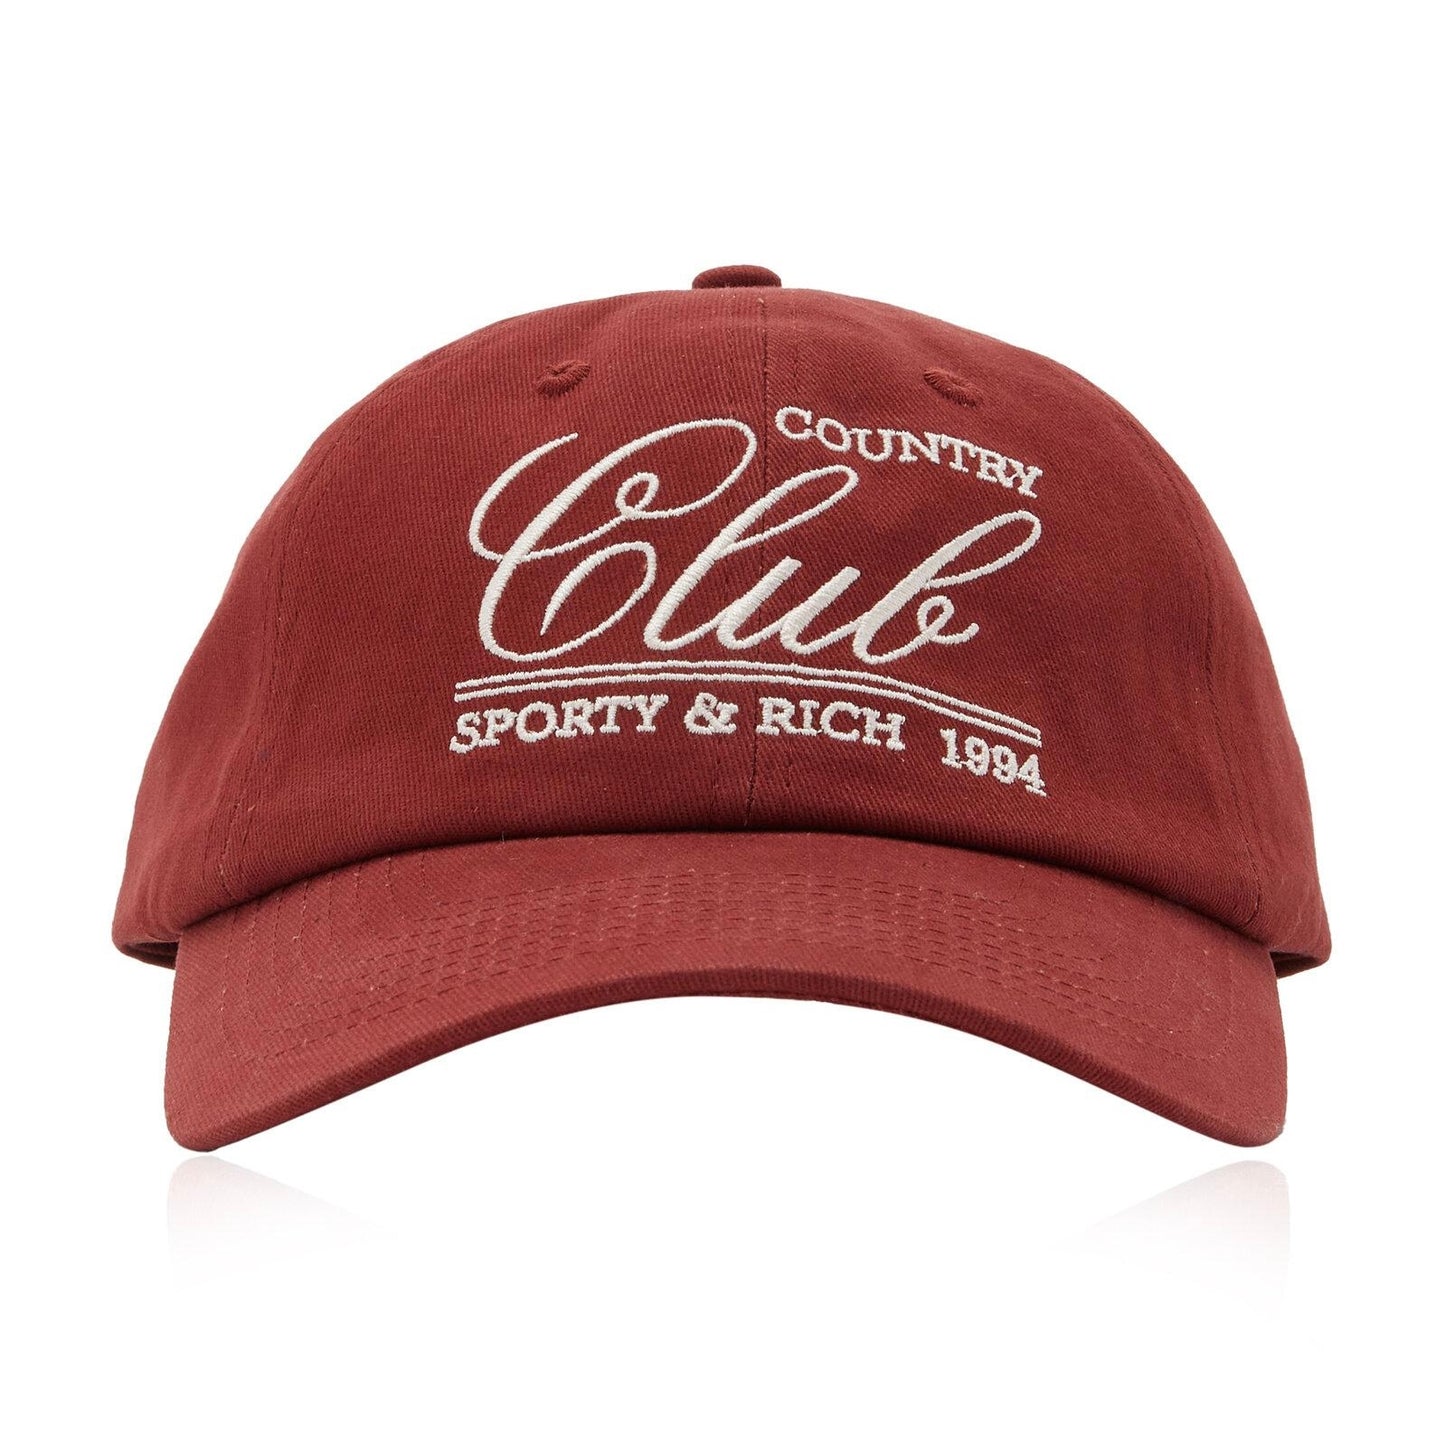 94 COUNTRY CLUB HAT